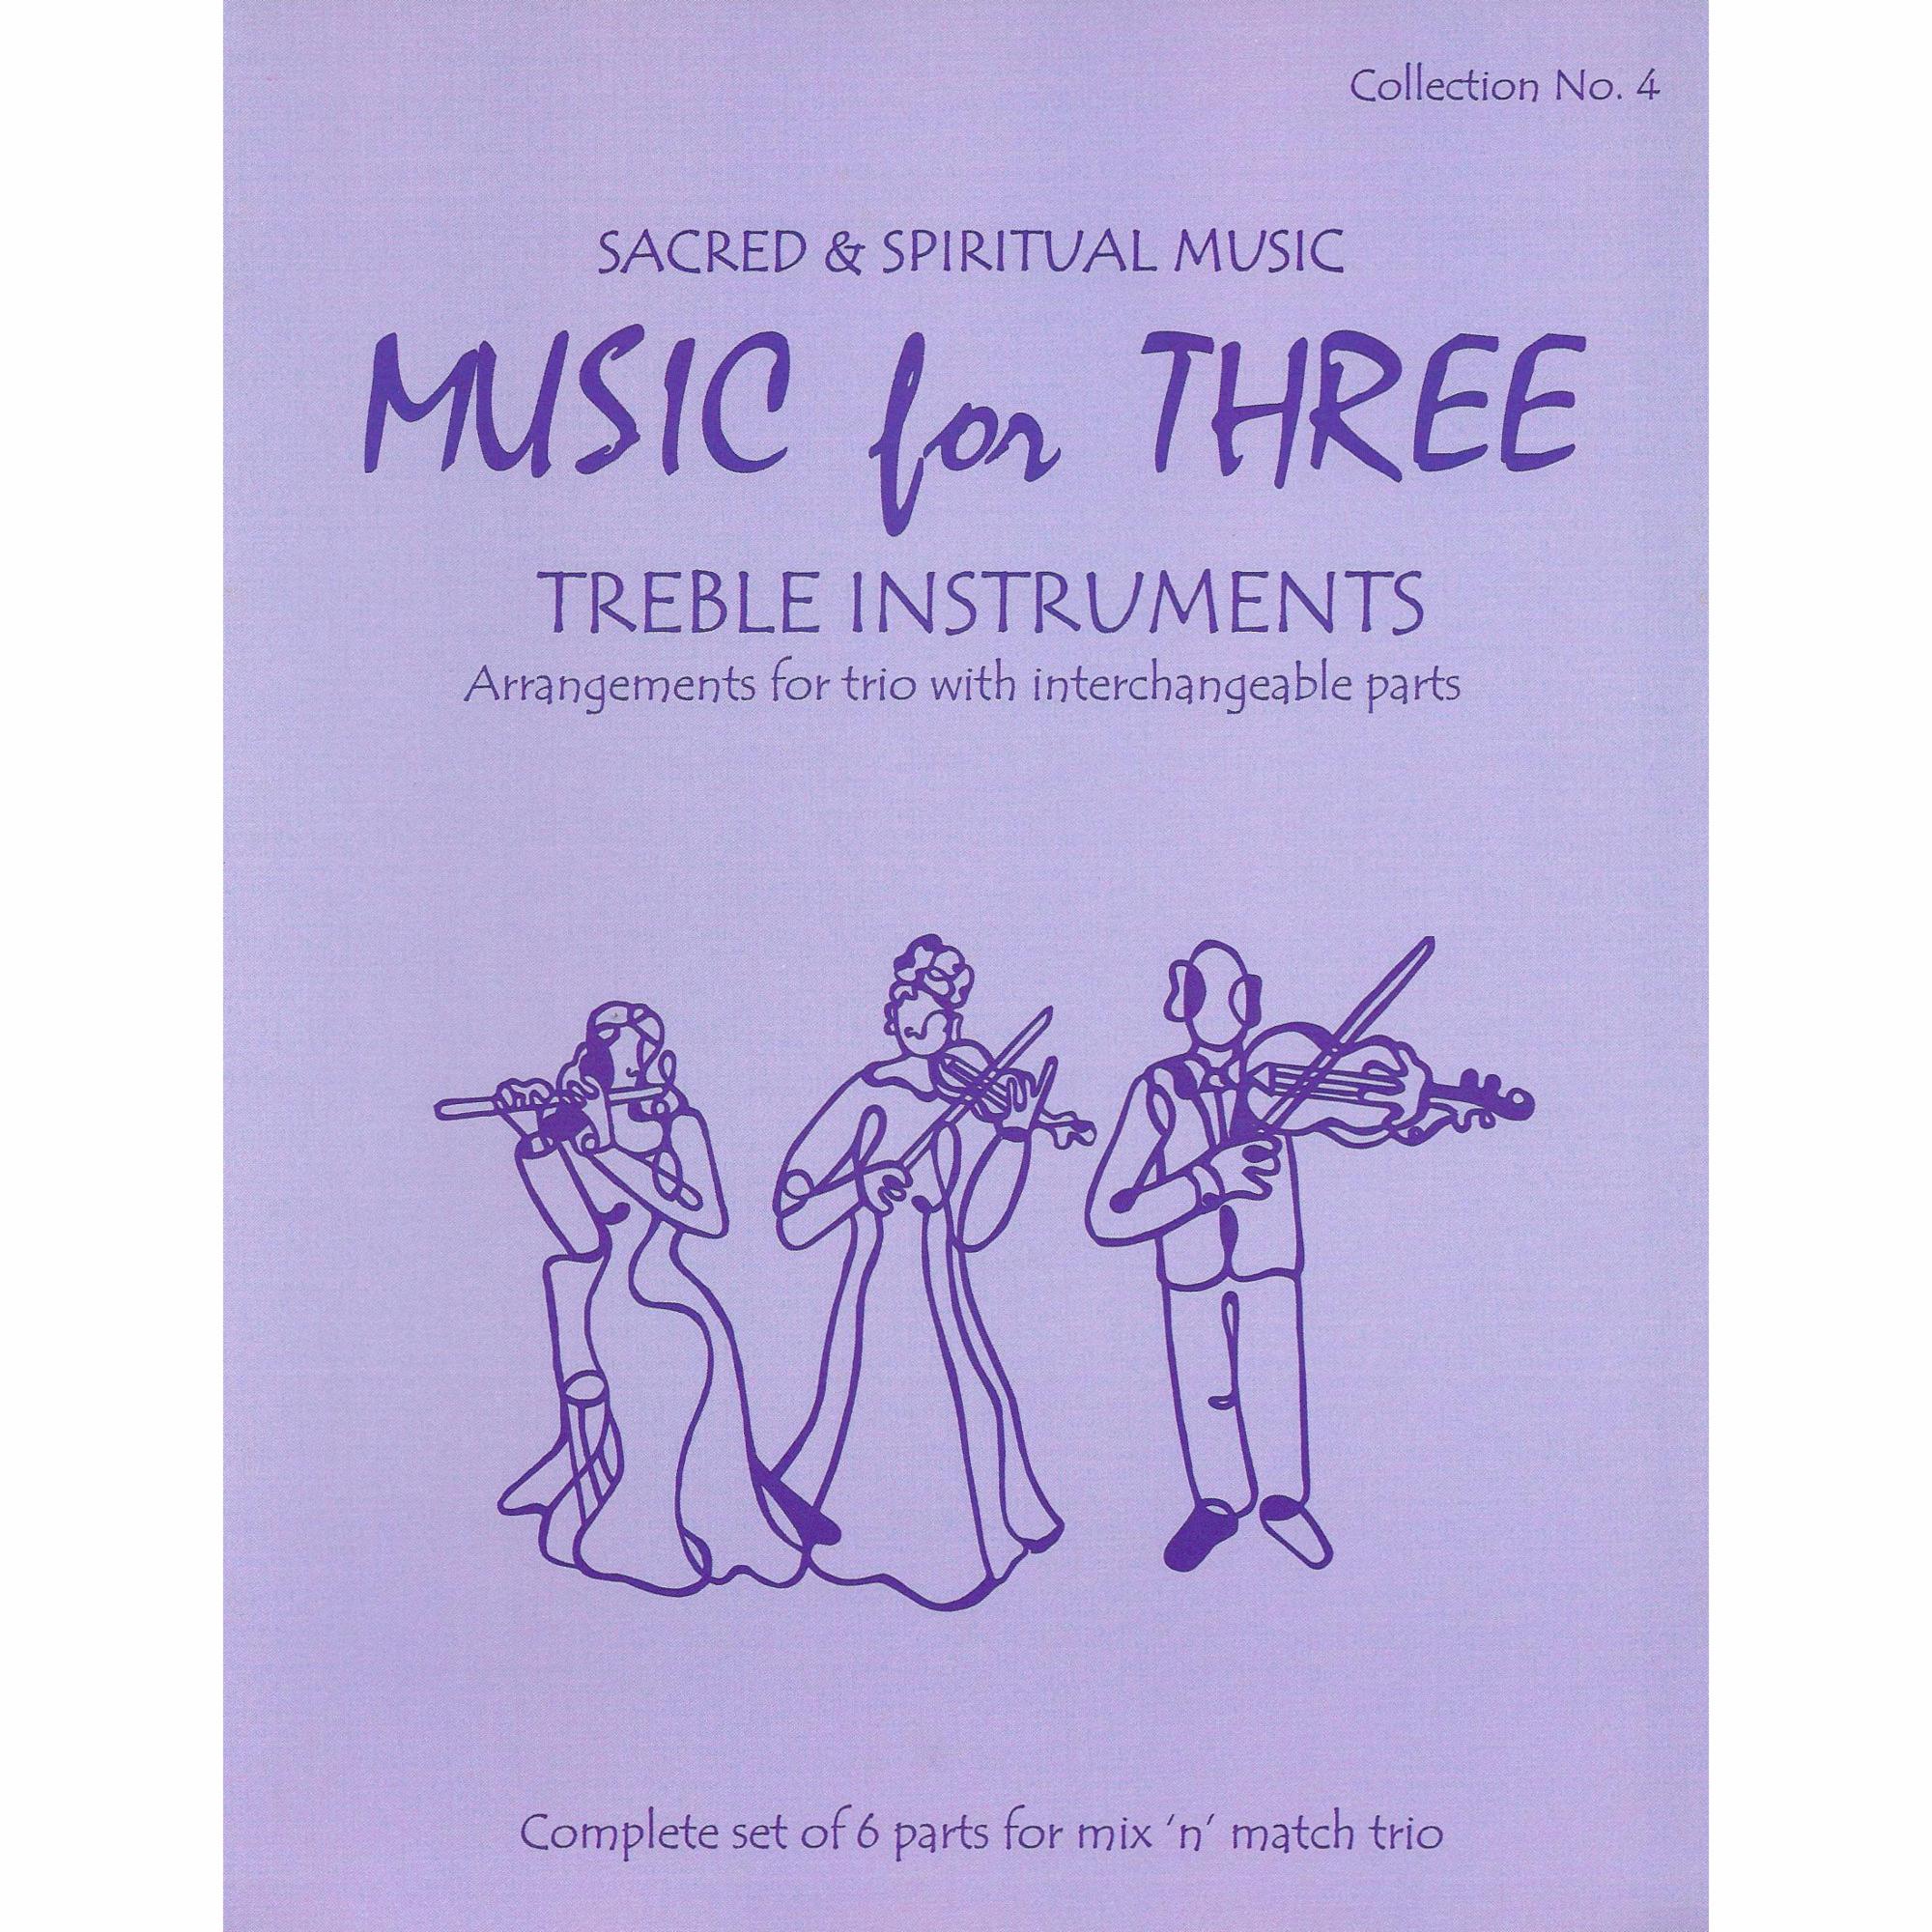 Music for Three Treble Instruments, Collection 4